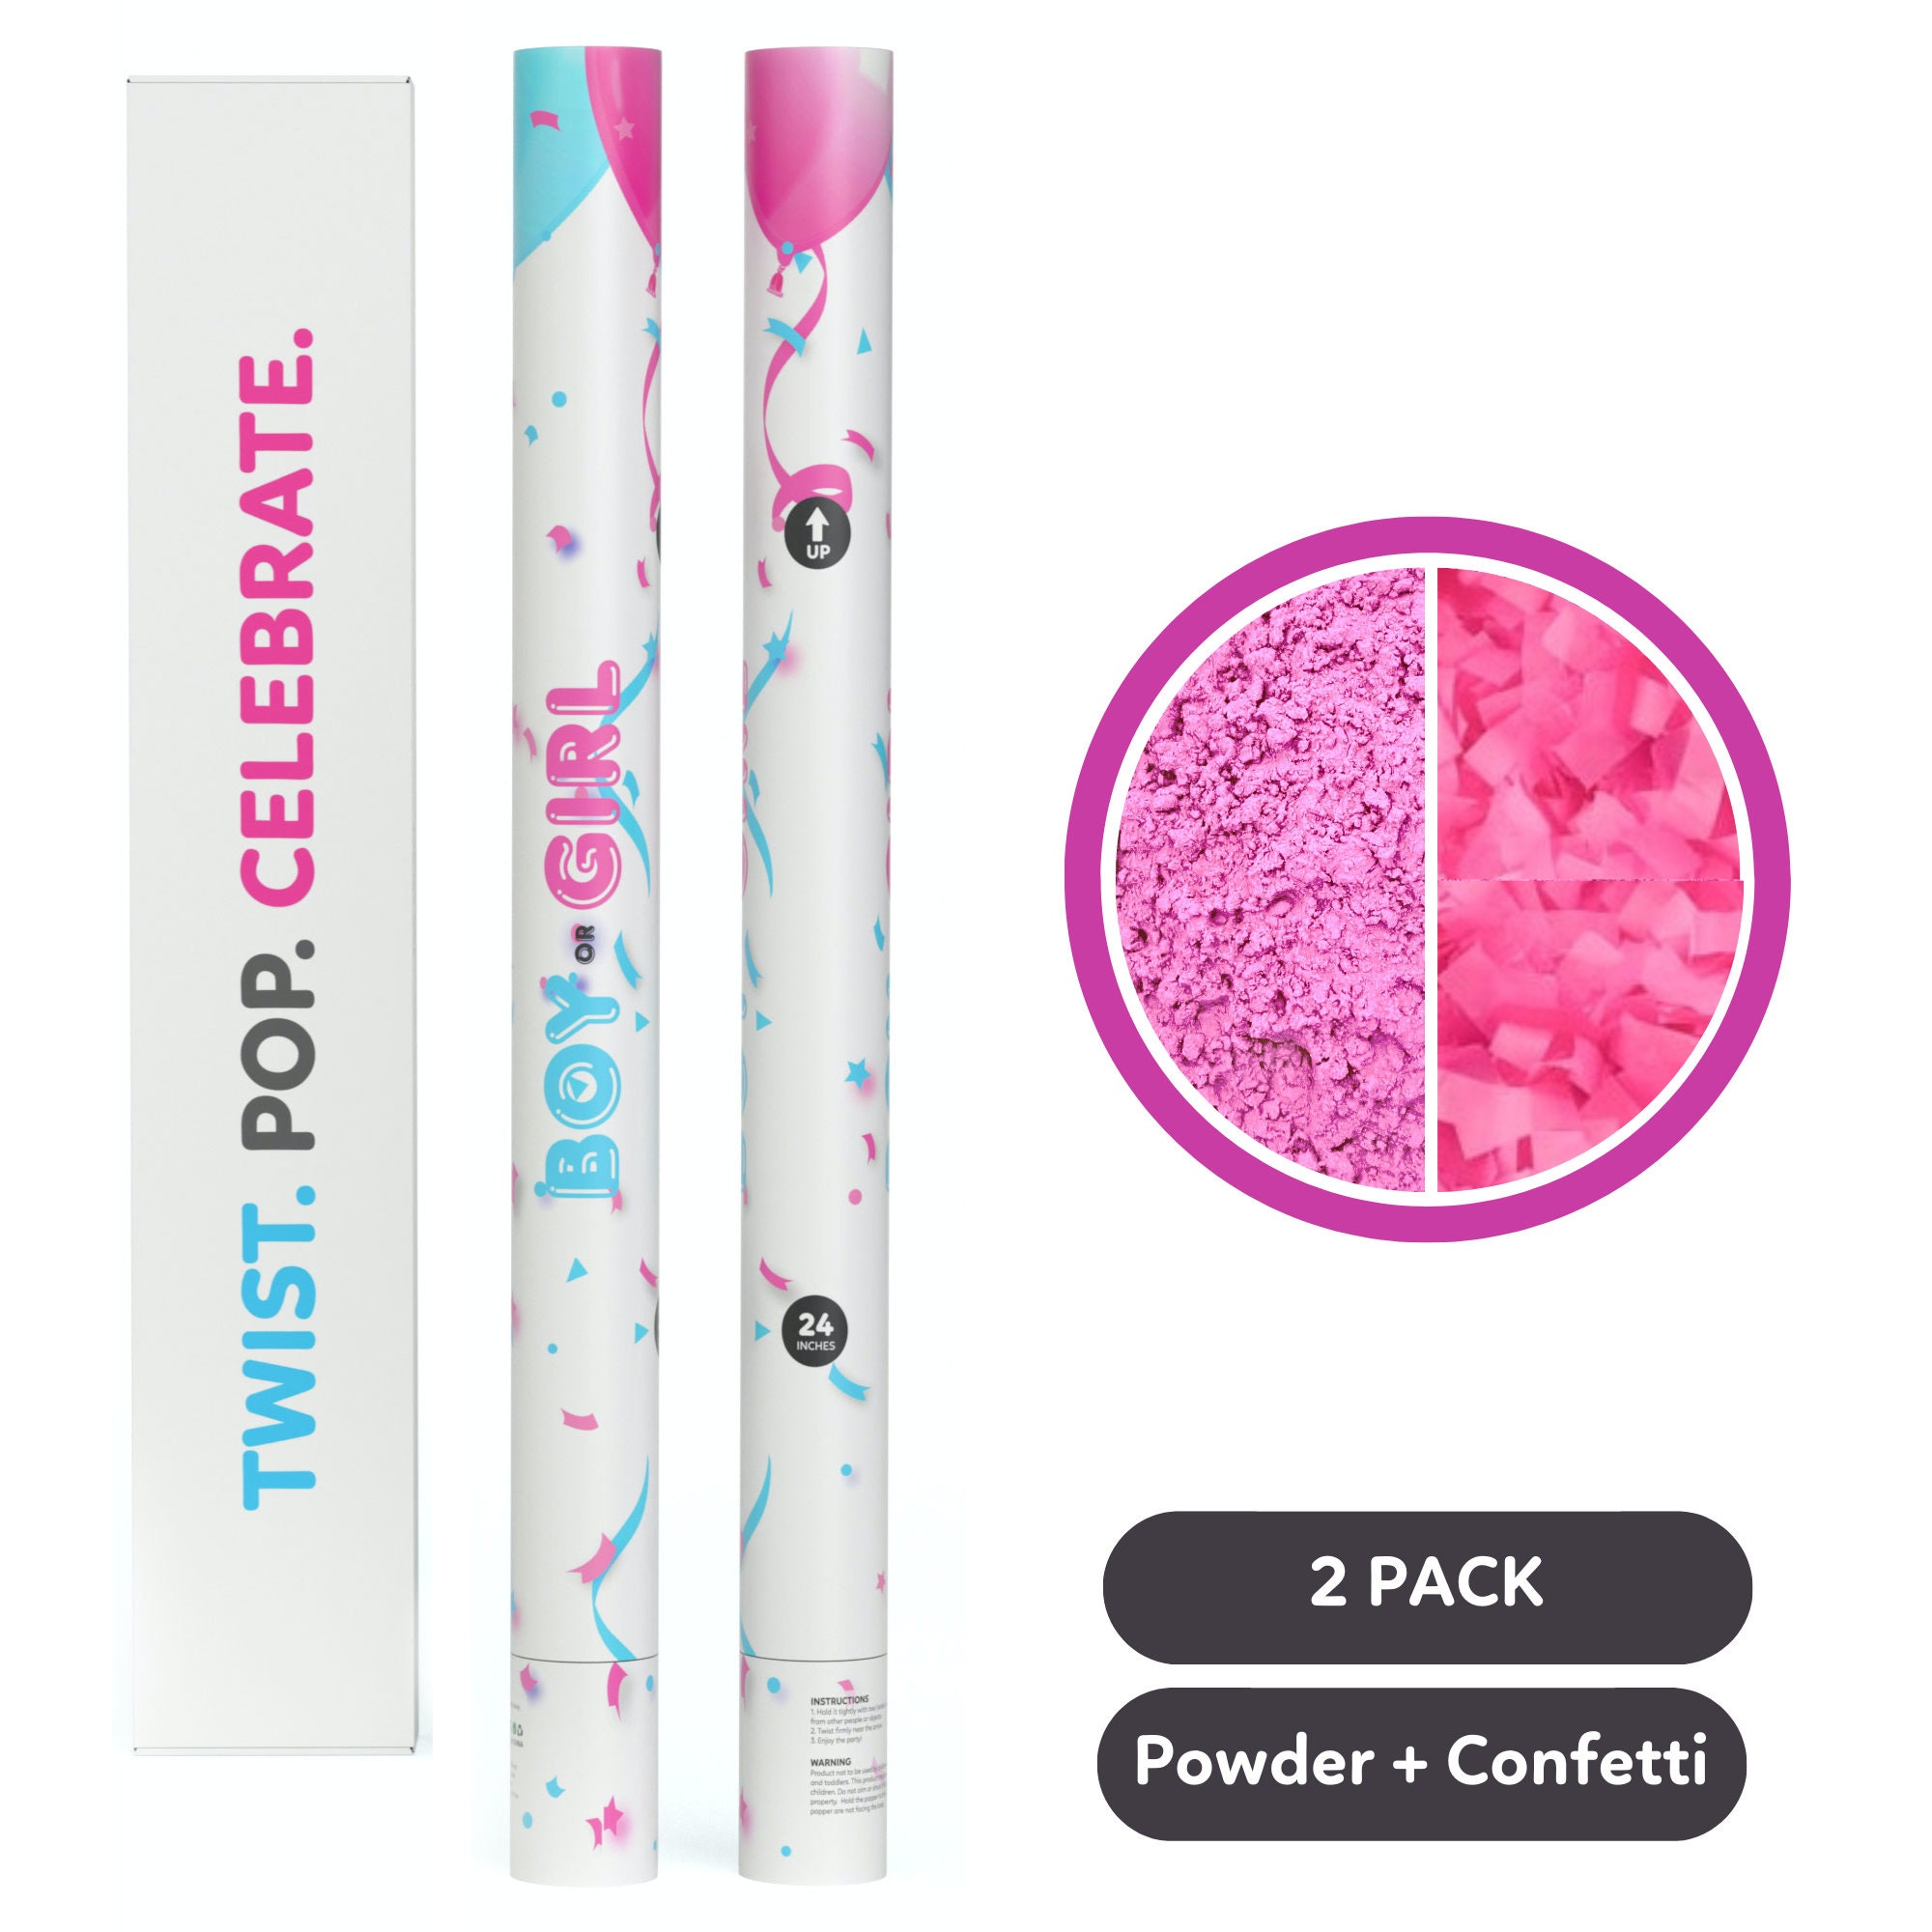 2 Pack Giant Gender Reveal Powder and Confetti Poppers Gender